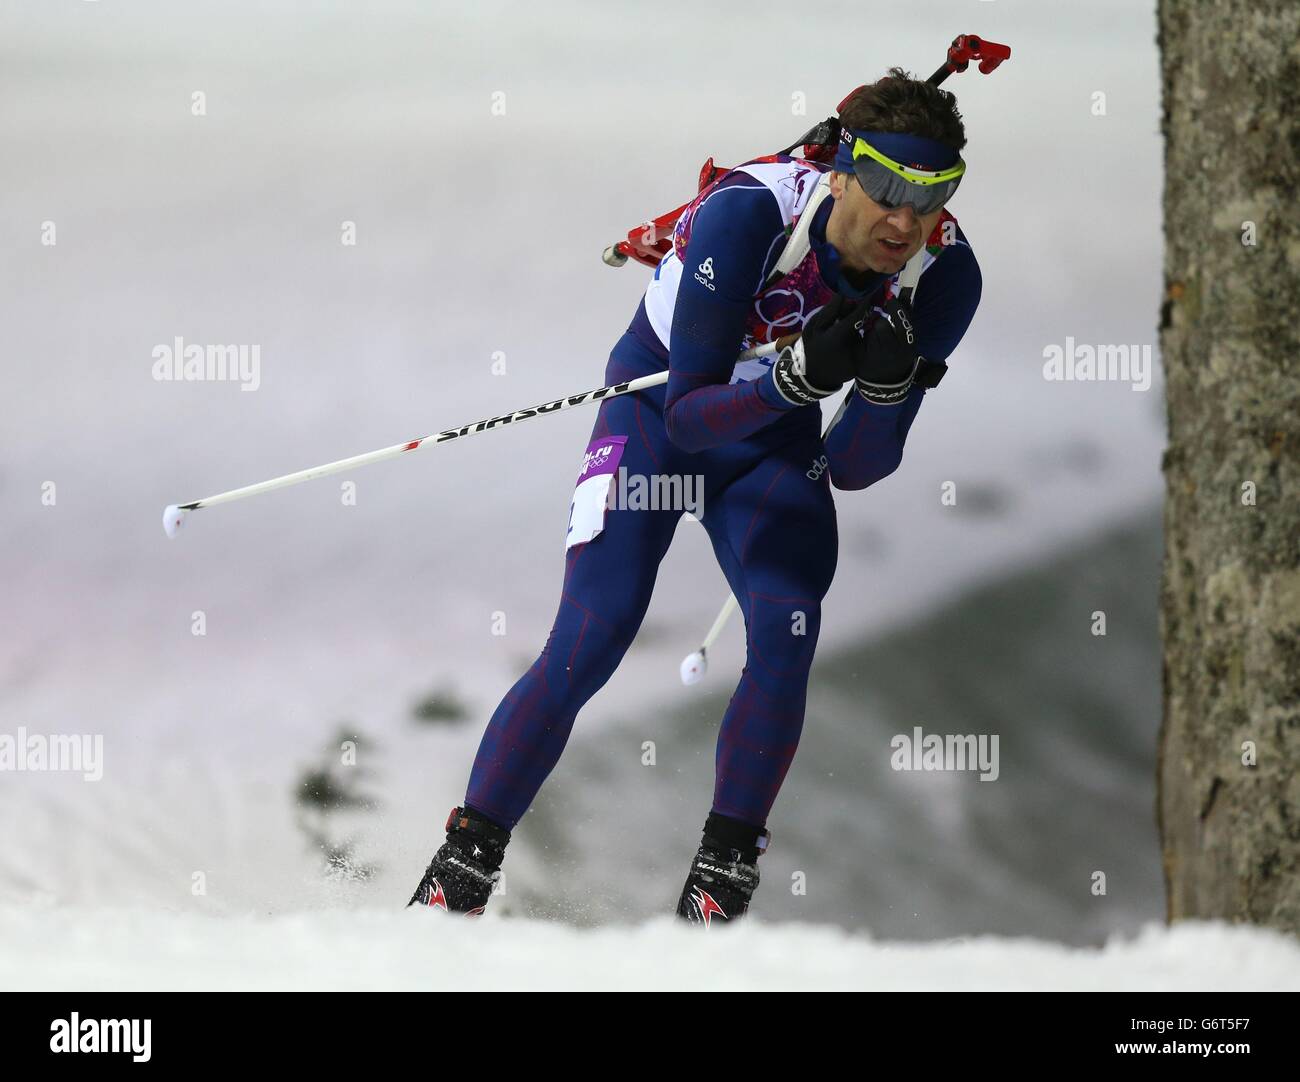 Norway's Ole Einar Bjoerndalen in the Biathlon Men's 12.5km Pursuit at The Laura Cross-Country and Biathlon Centre during the 2014 Sochi Olympic Games in Krasnaya Polyana, Russia. Stock Photo